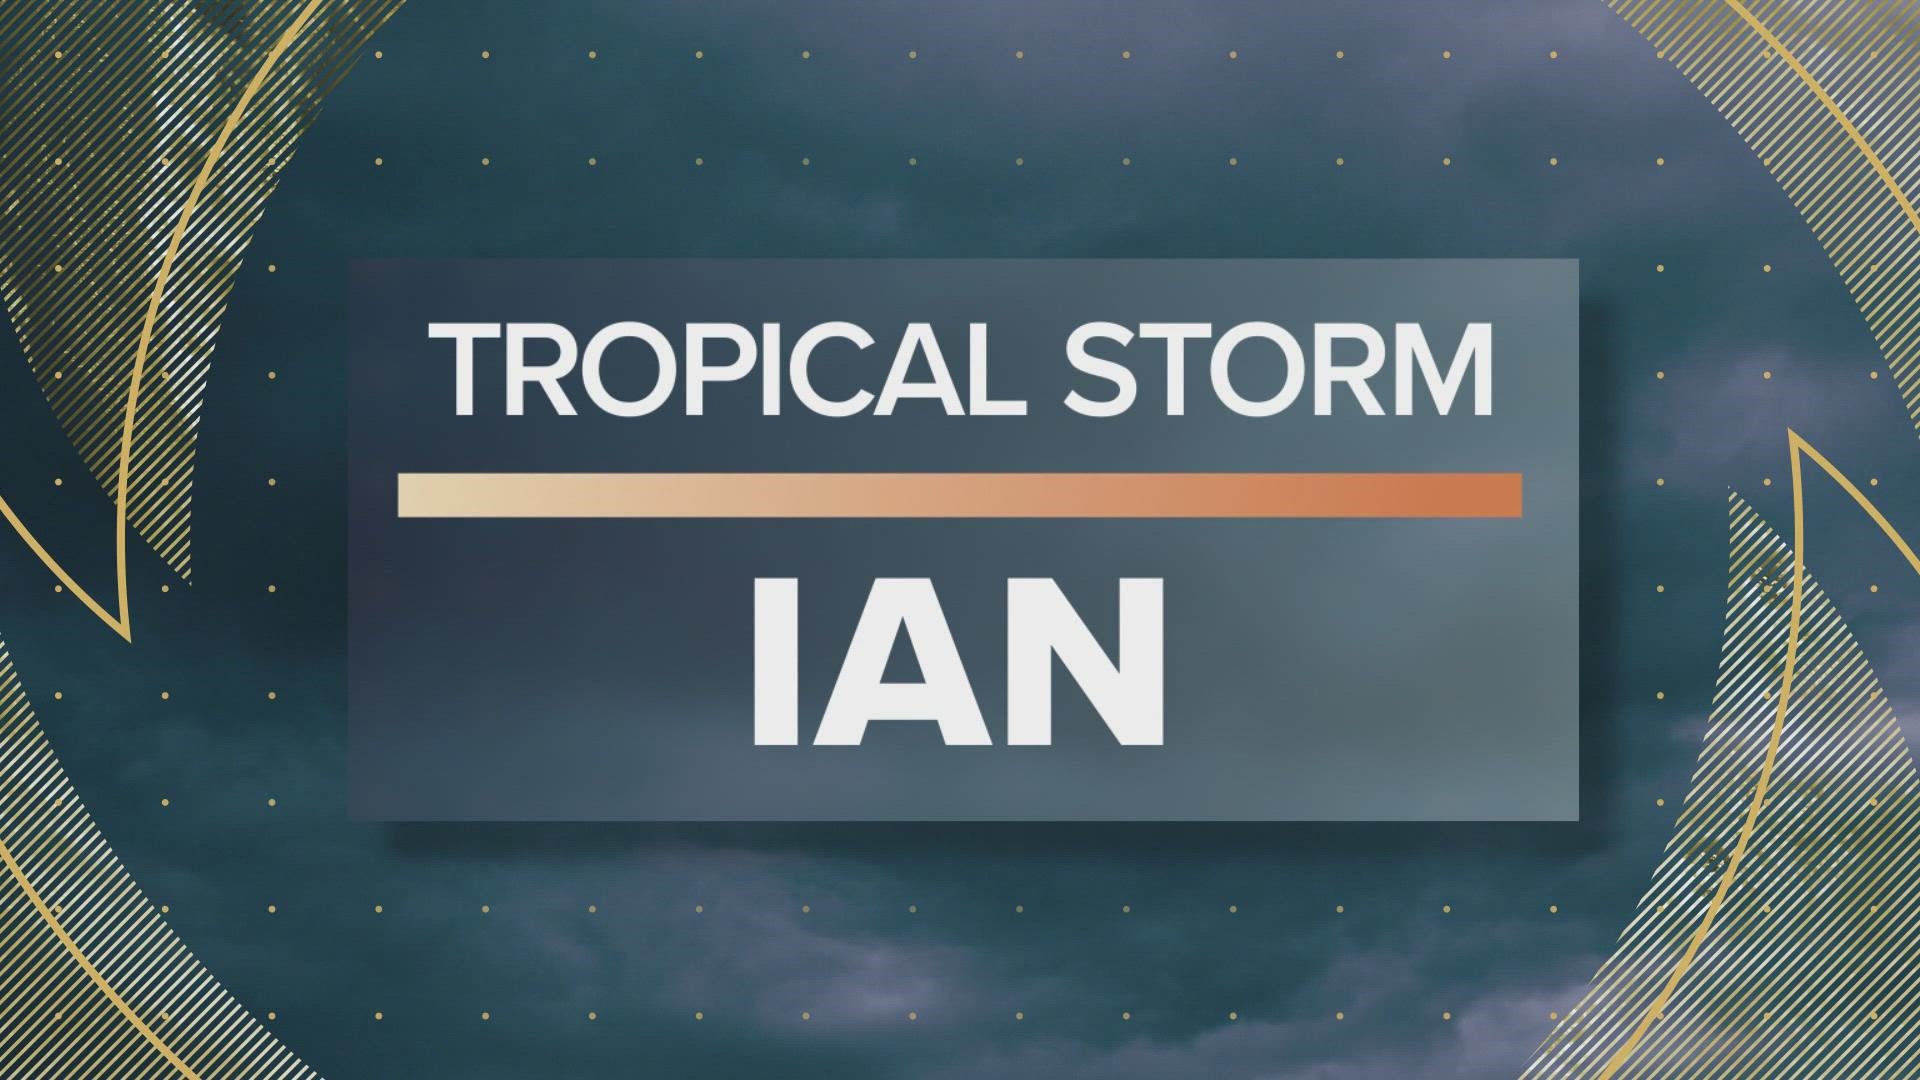 Ian is a little stronger and is set to become a hurricane by  Sunday night. Tropical storm and hurricane watches are now in effect for western Cuba.